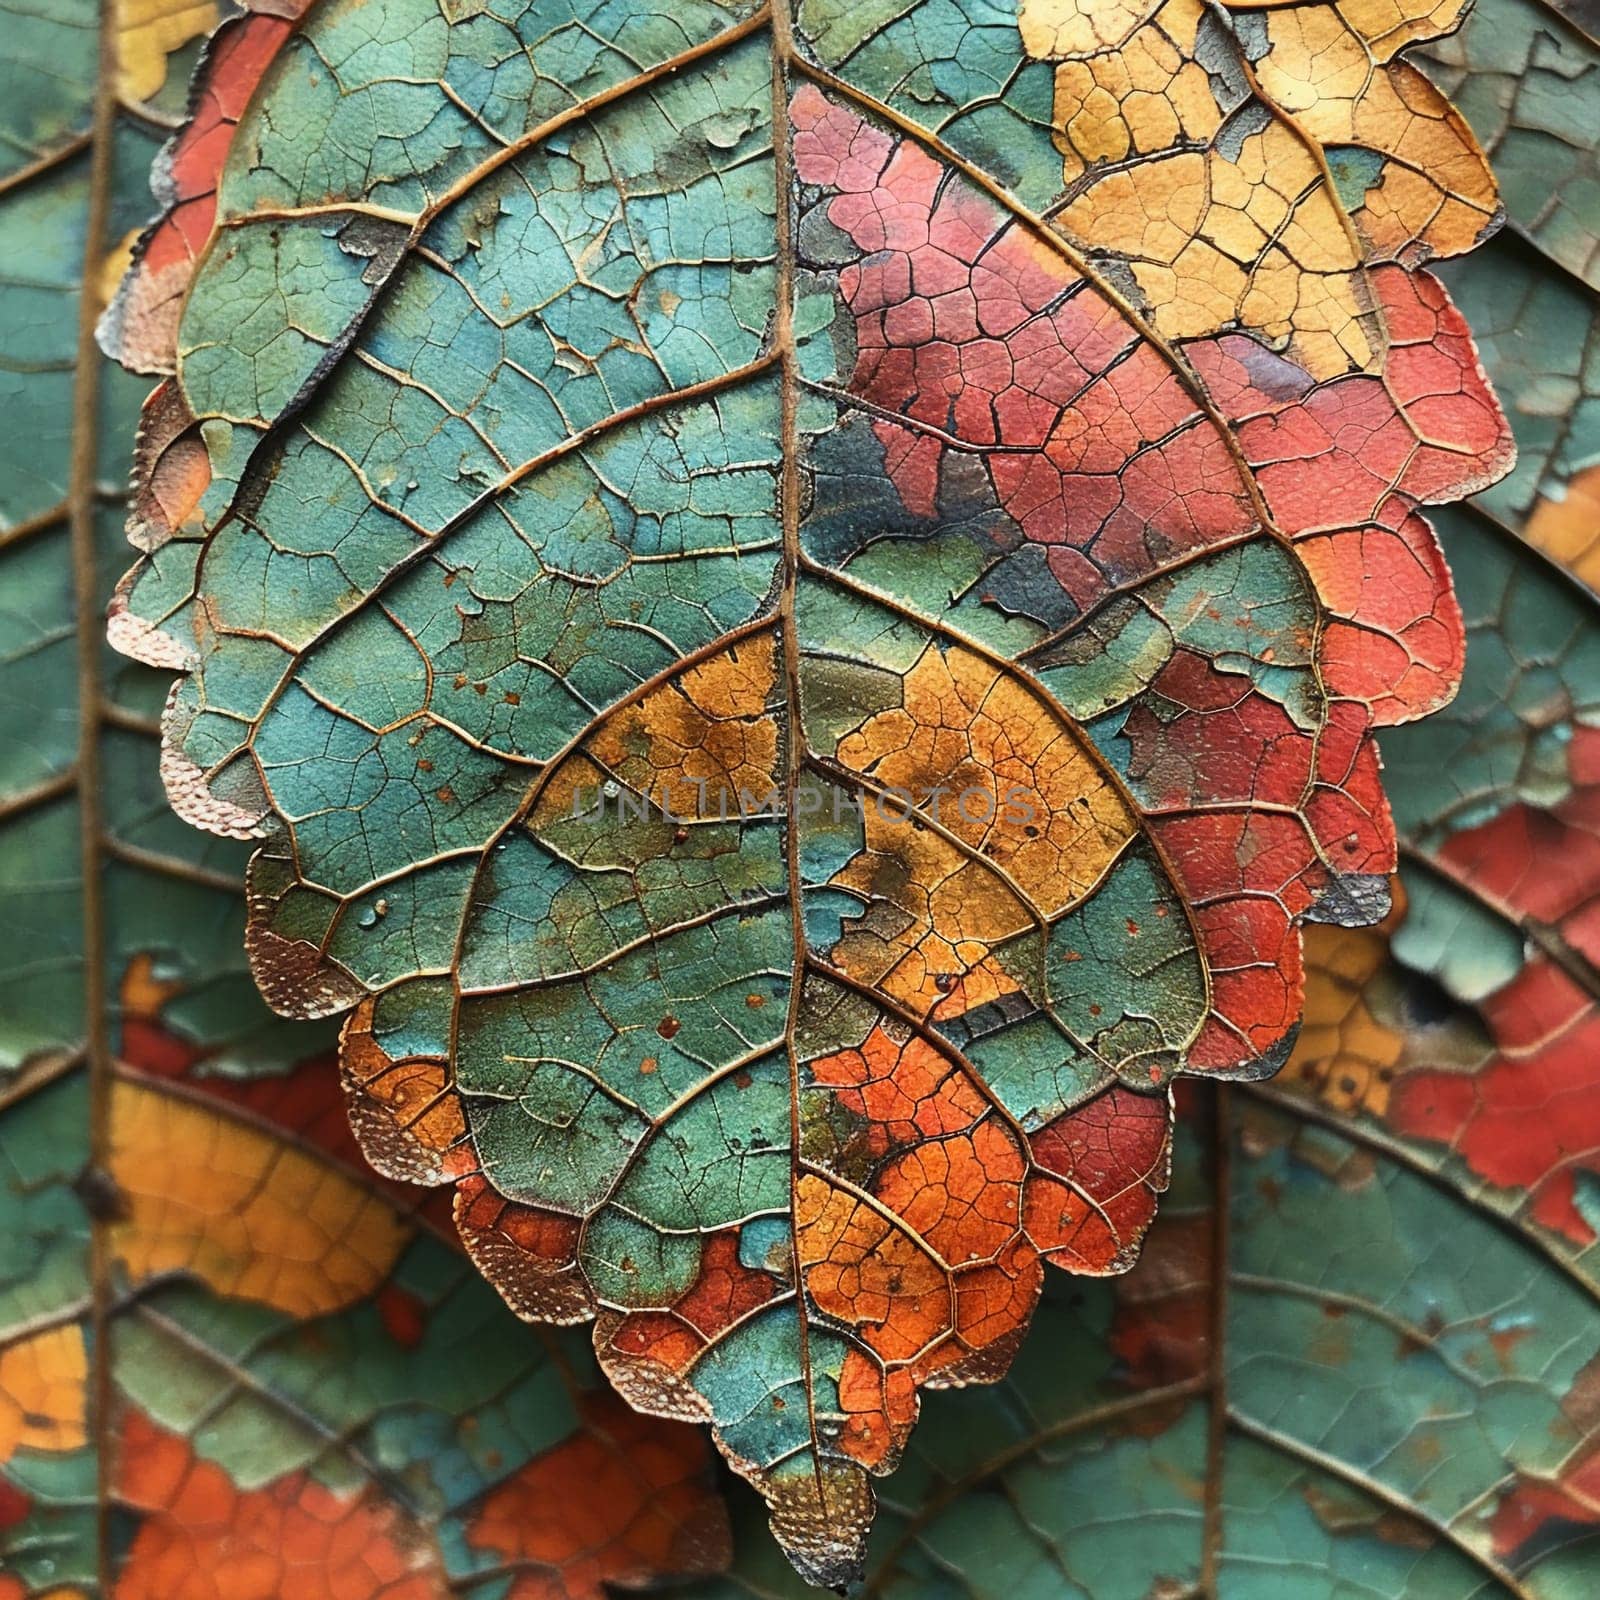 Close-up of texture on leaf, showcasing nature and patterns.